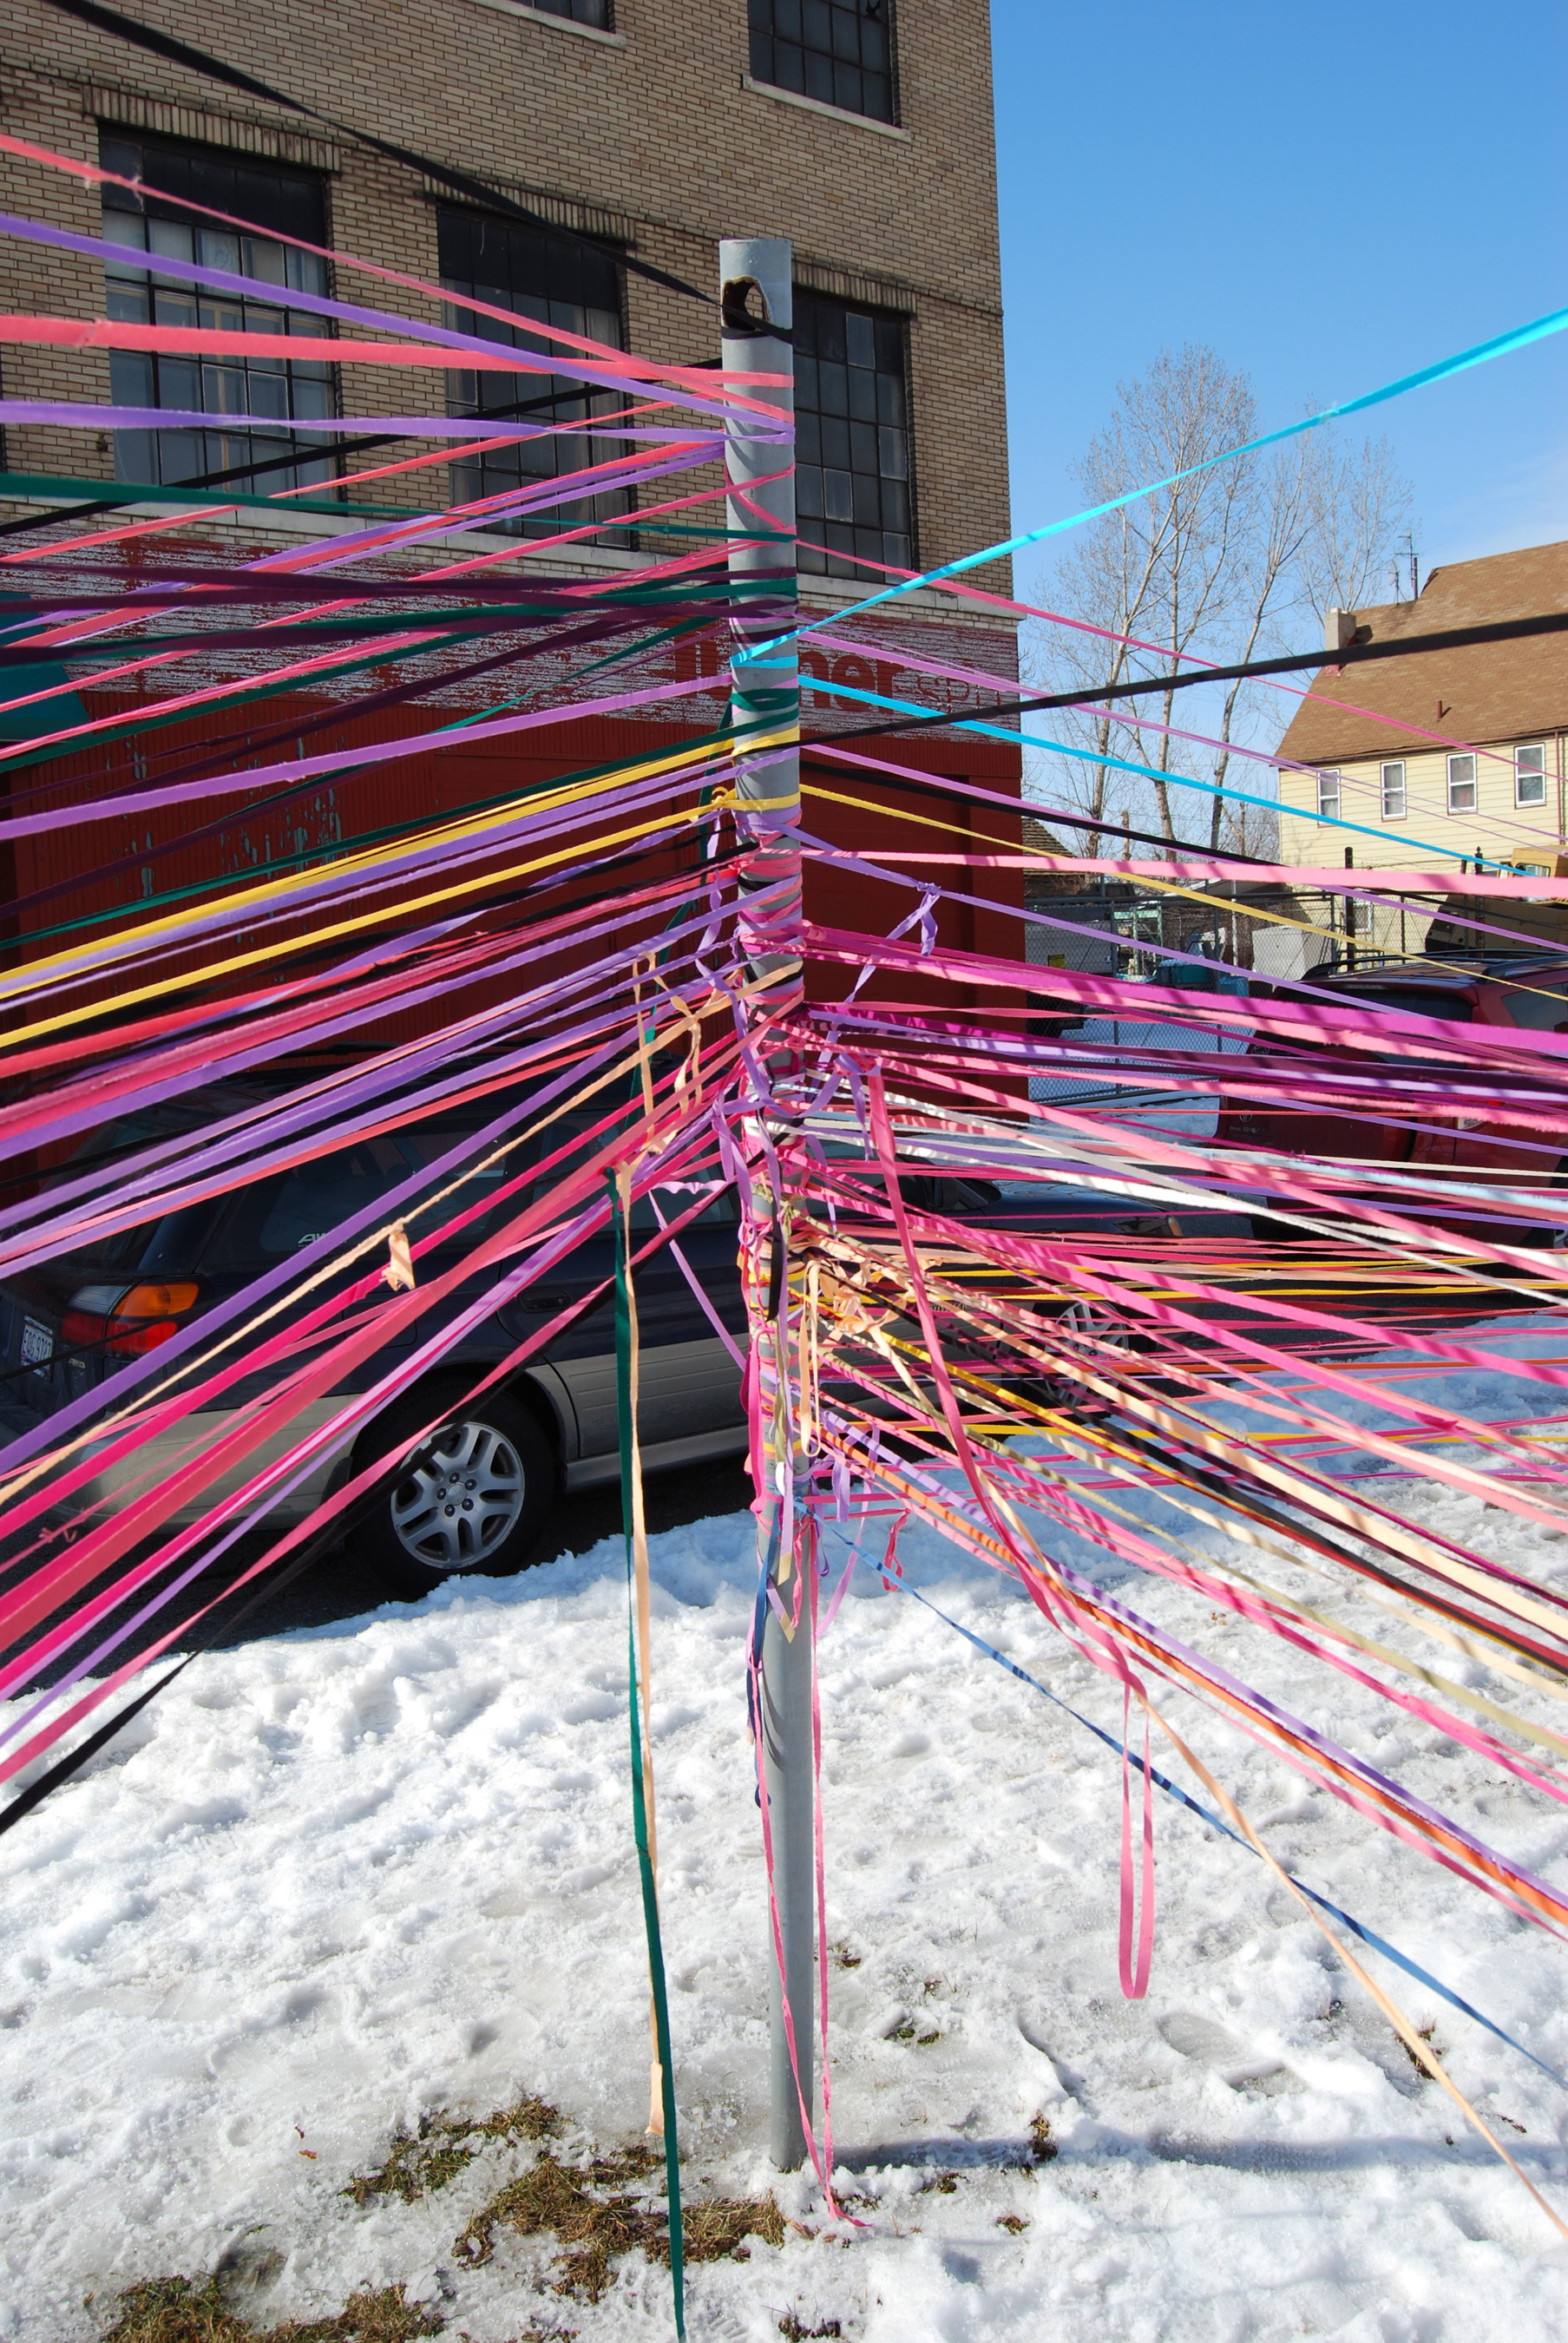  This was one of the existing elements on the lot at E. 69th and Euclid where we tied off the ribbon. It stretched across the lot over to the wall remnant.  Photo: Chris Lynn 